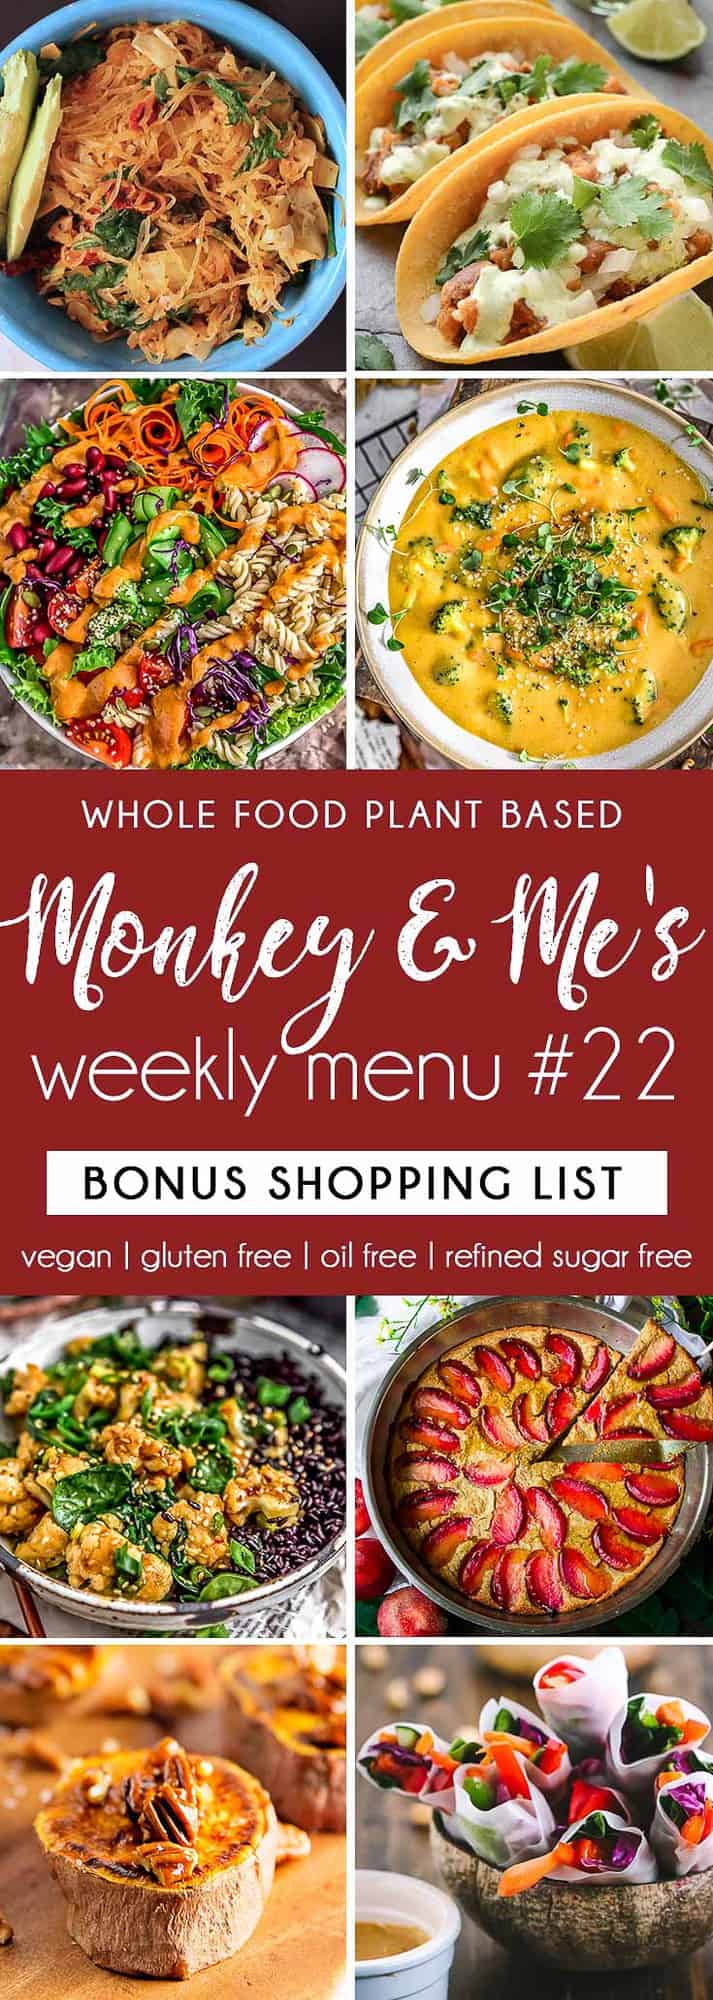 Monkey and Me's Menu 22 featuring 8 recipes